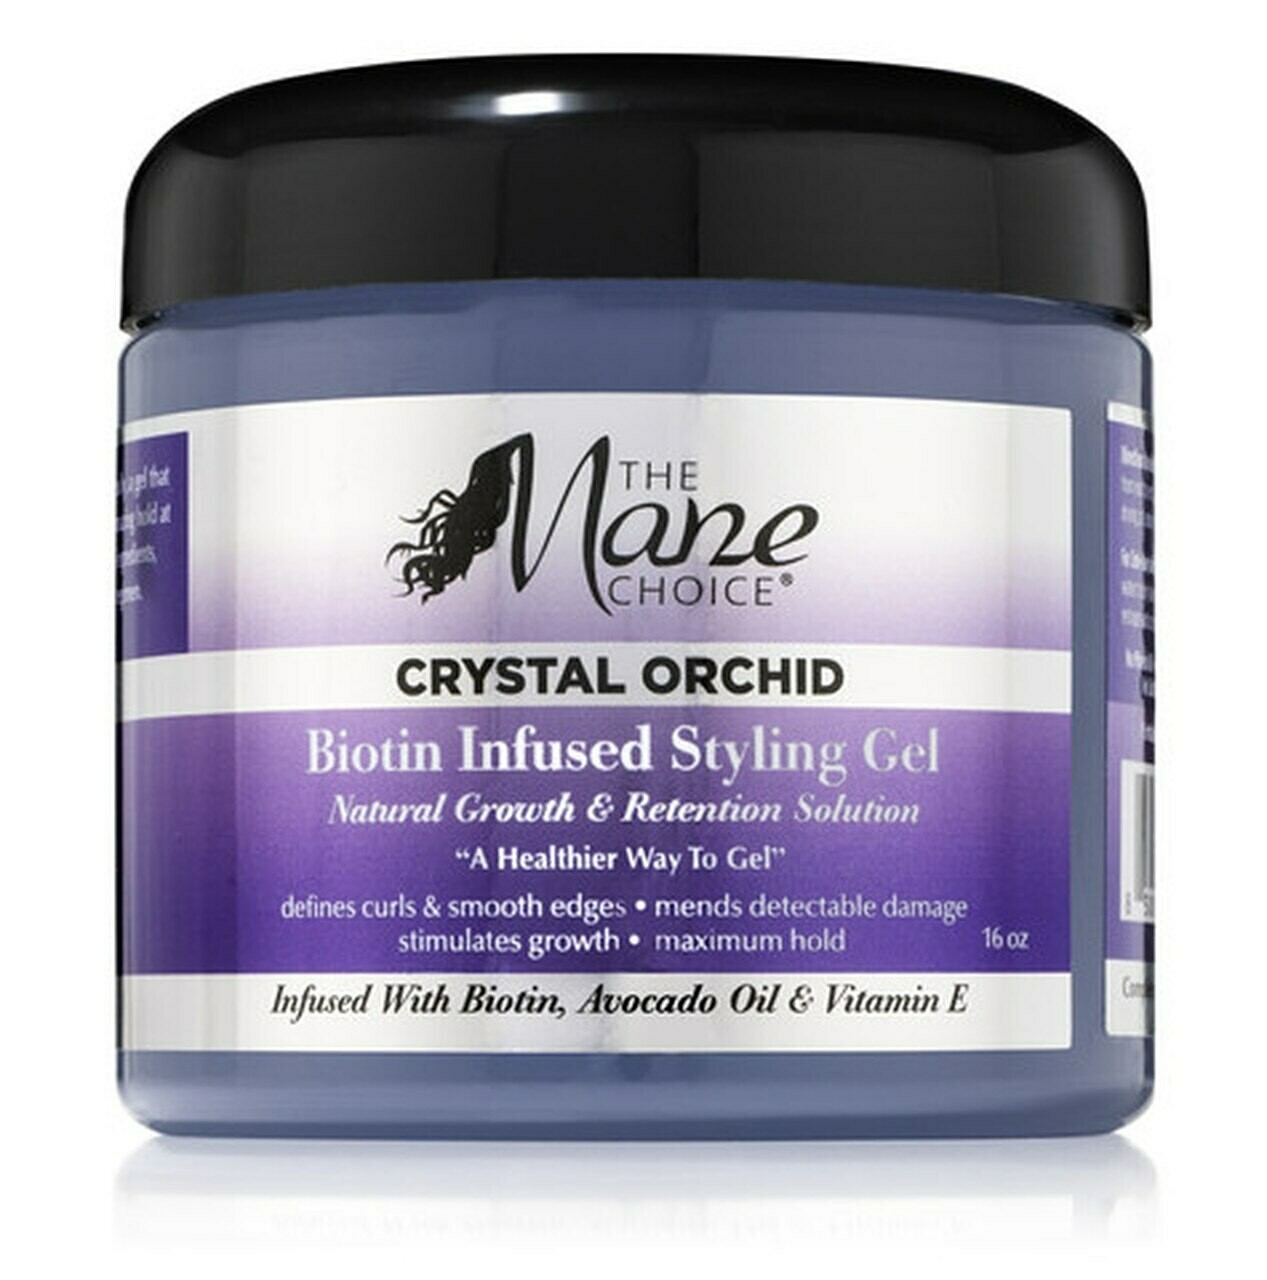 THE MANE CHOICE CRYSTAL ORCHID BIOTIN INFUSED STYLING GEL